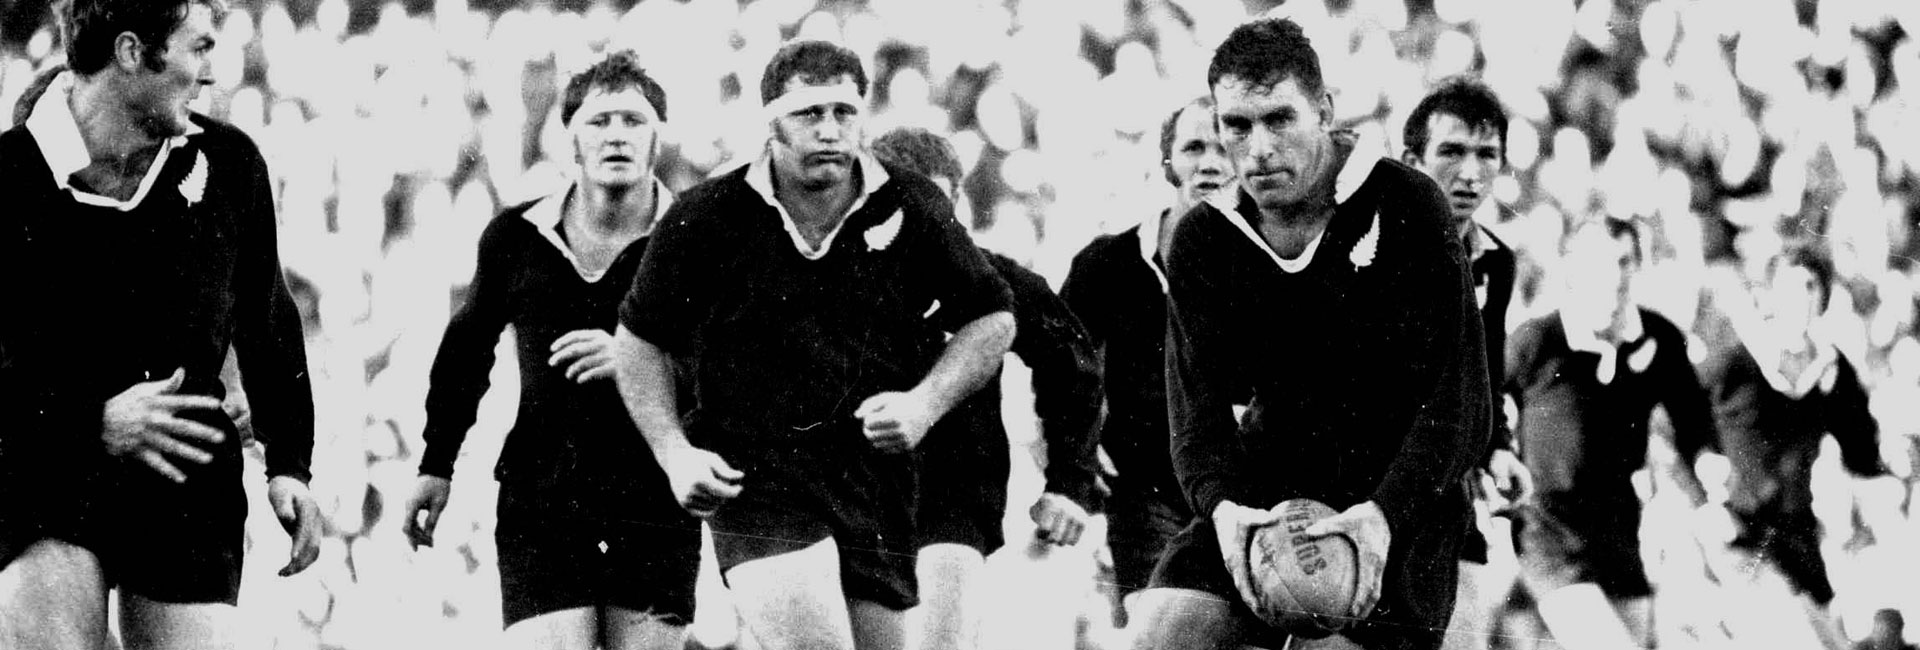 Colin Meads playing for the All Blacks